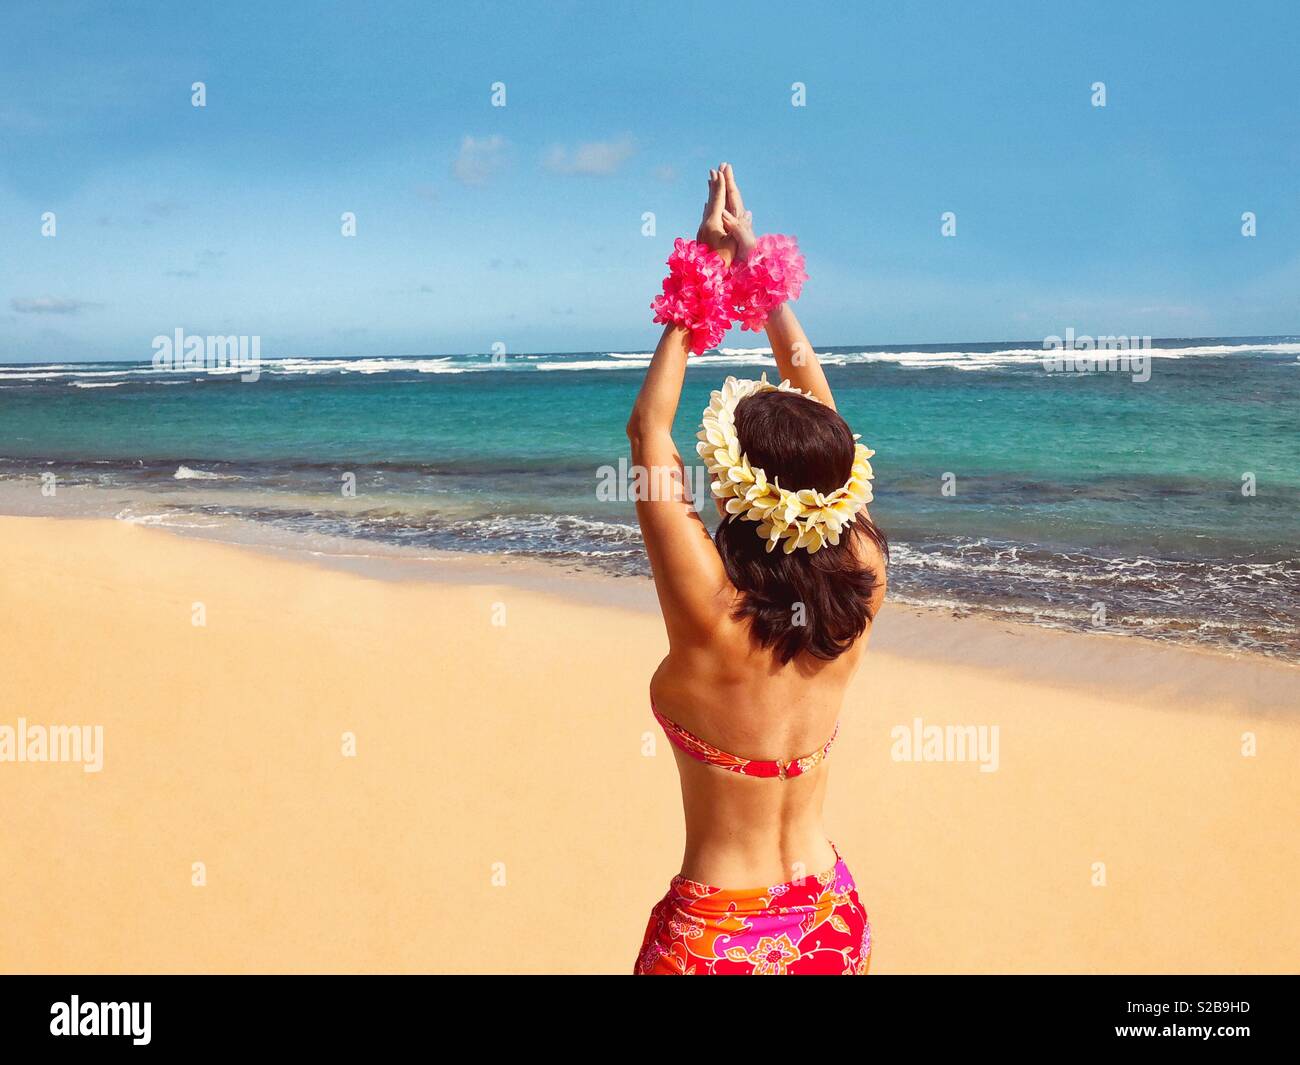 Native Hawaiian princess hula dancer on deserted Pacific island beach adorned with floral bikini and matching pareo, flowers, flowered leis in hands and hair Stock Photo